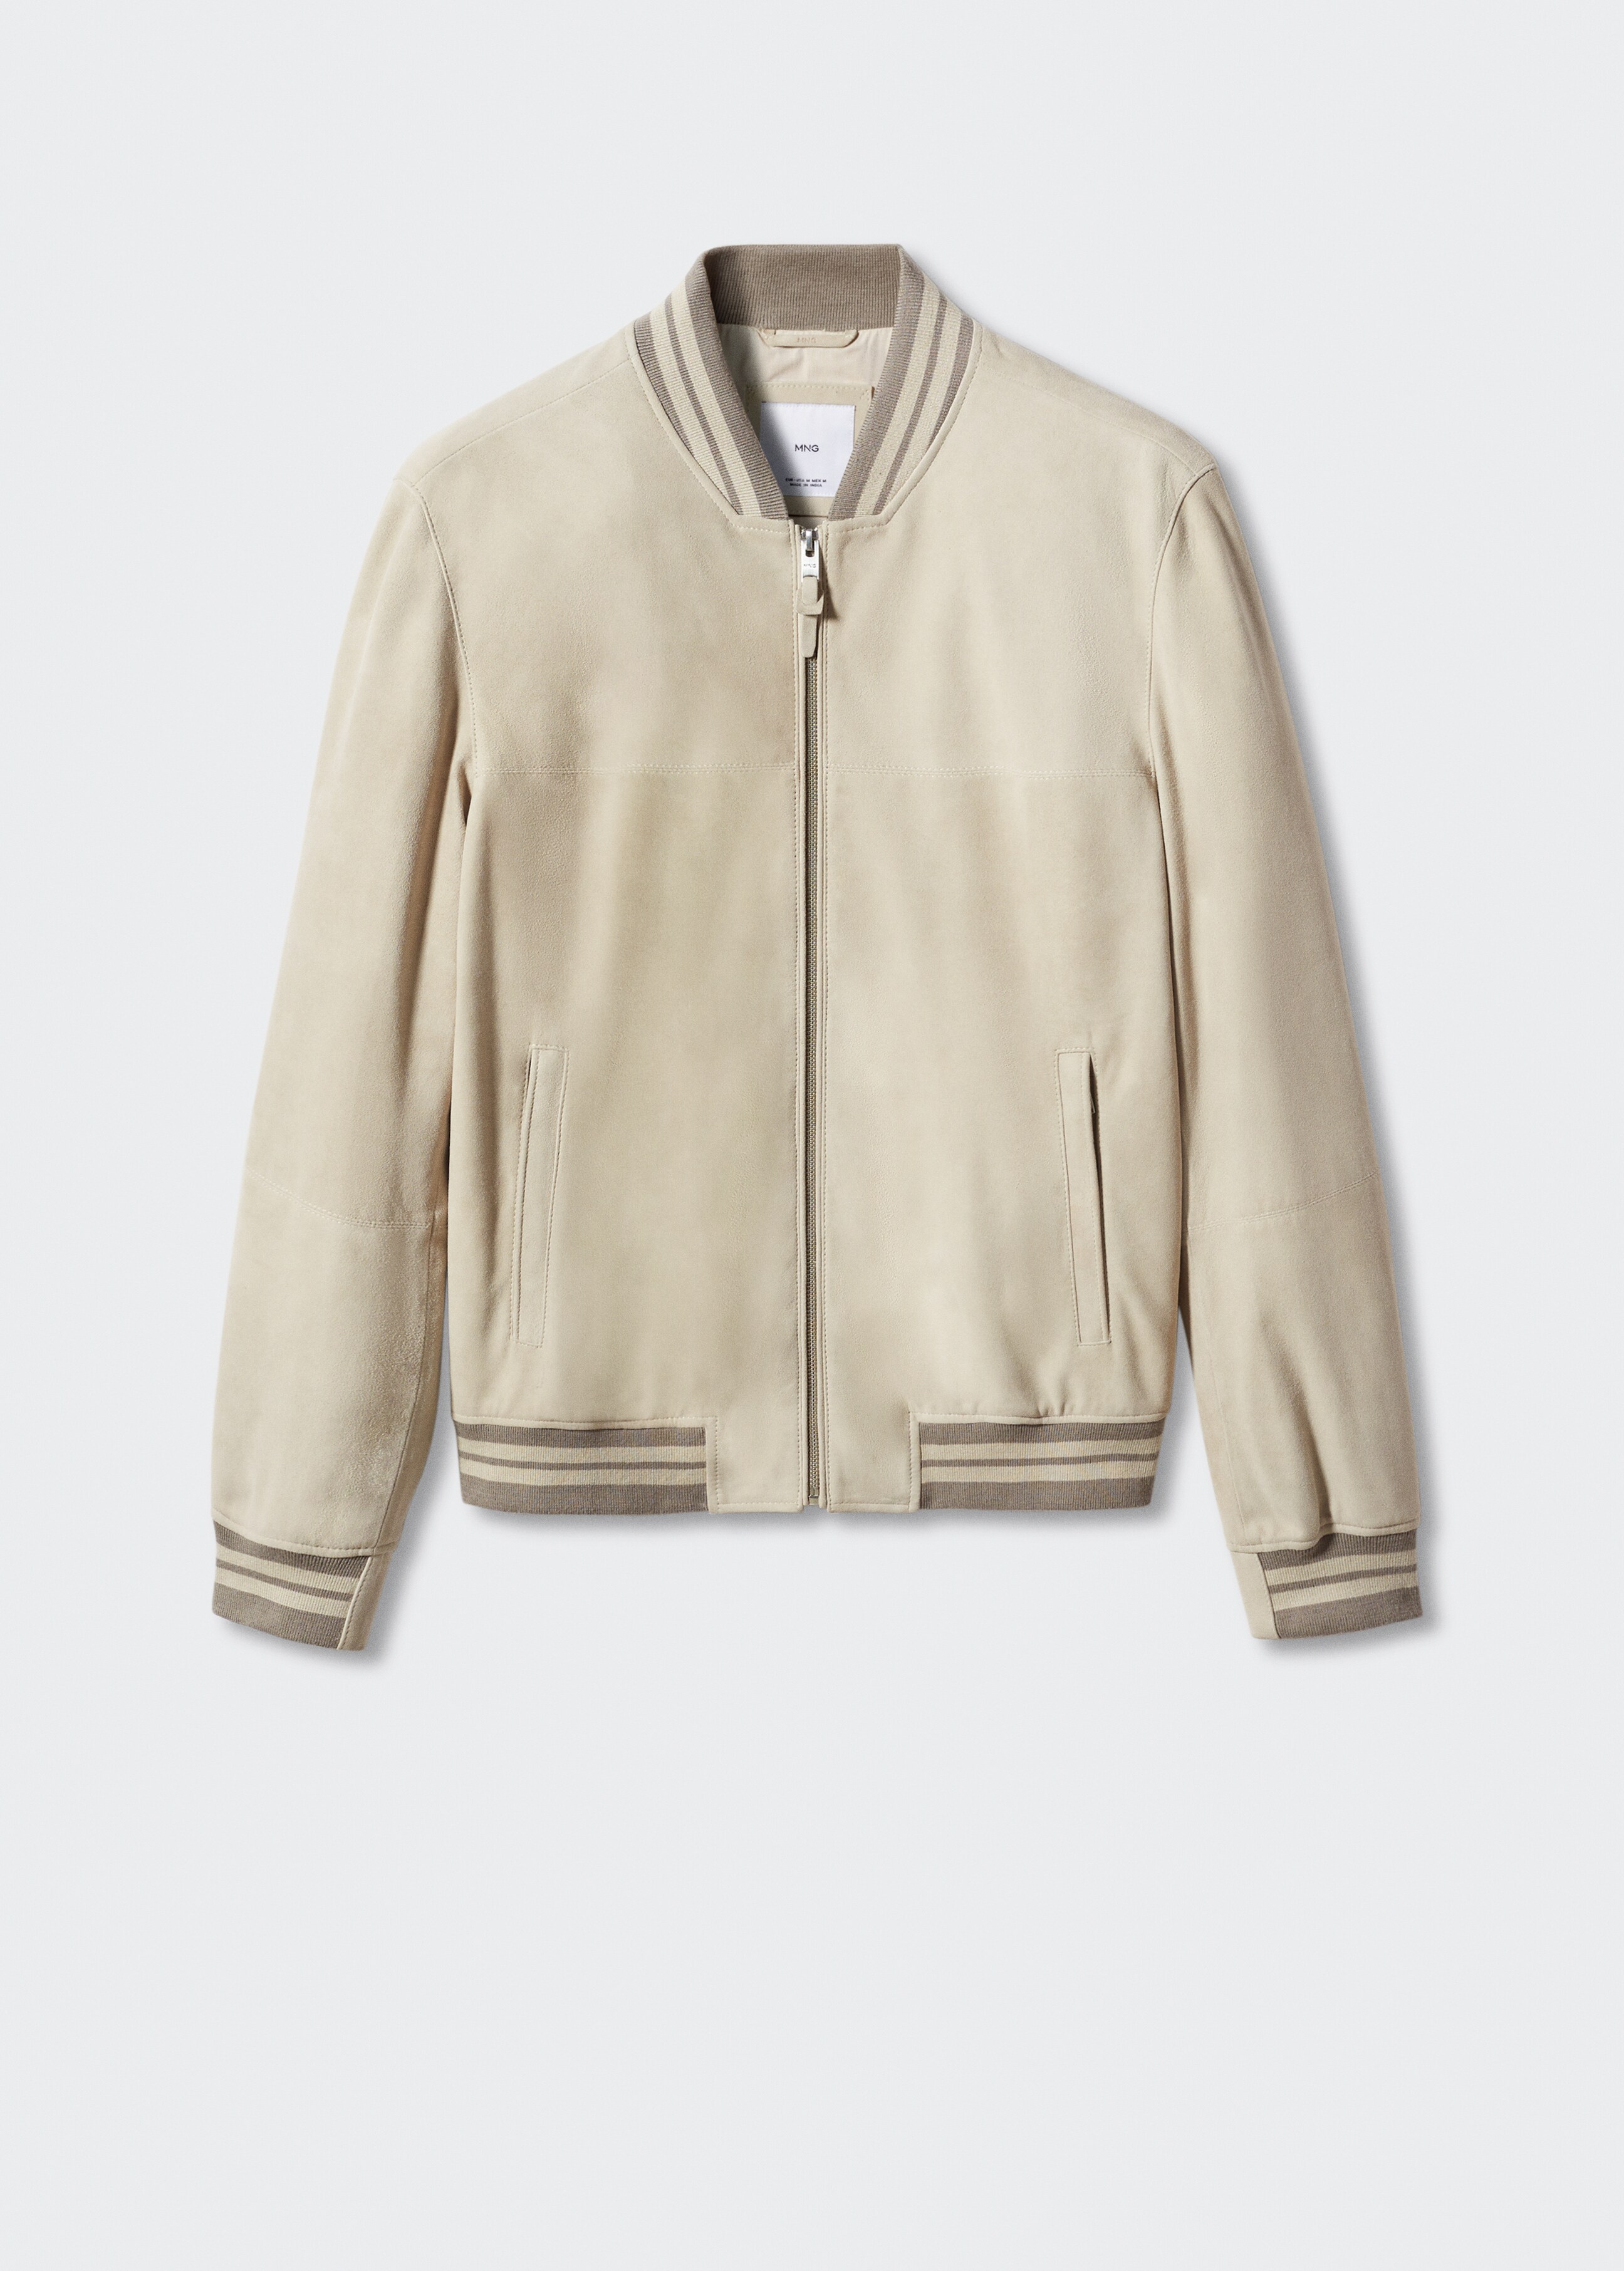 Suede leather bomber jacket - Article without model